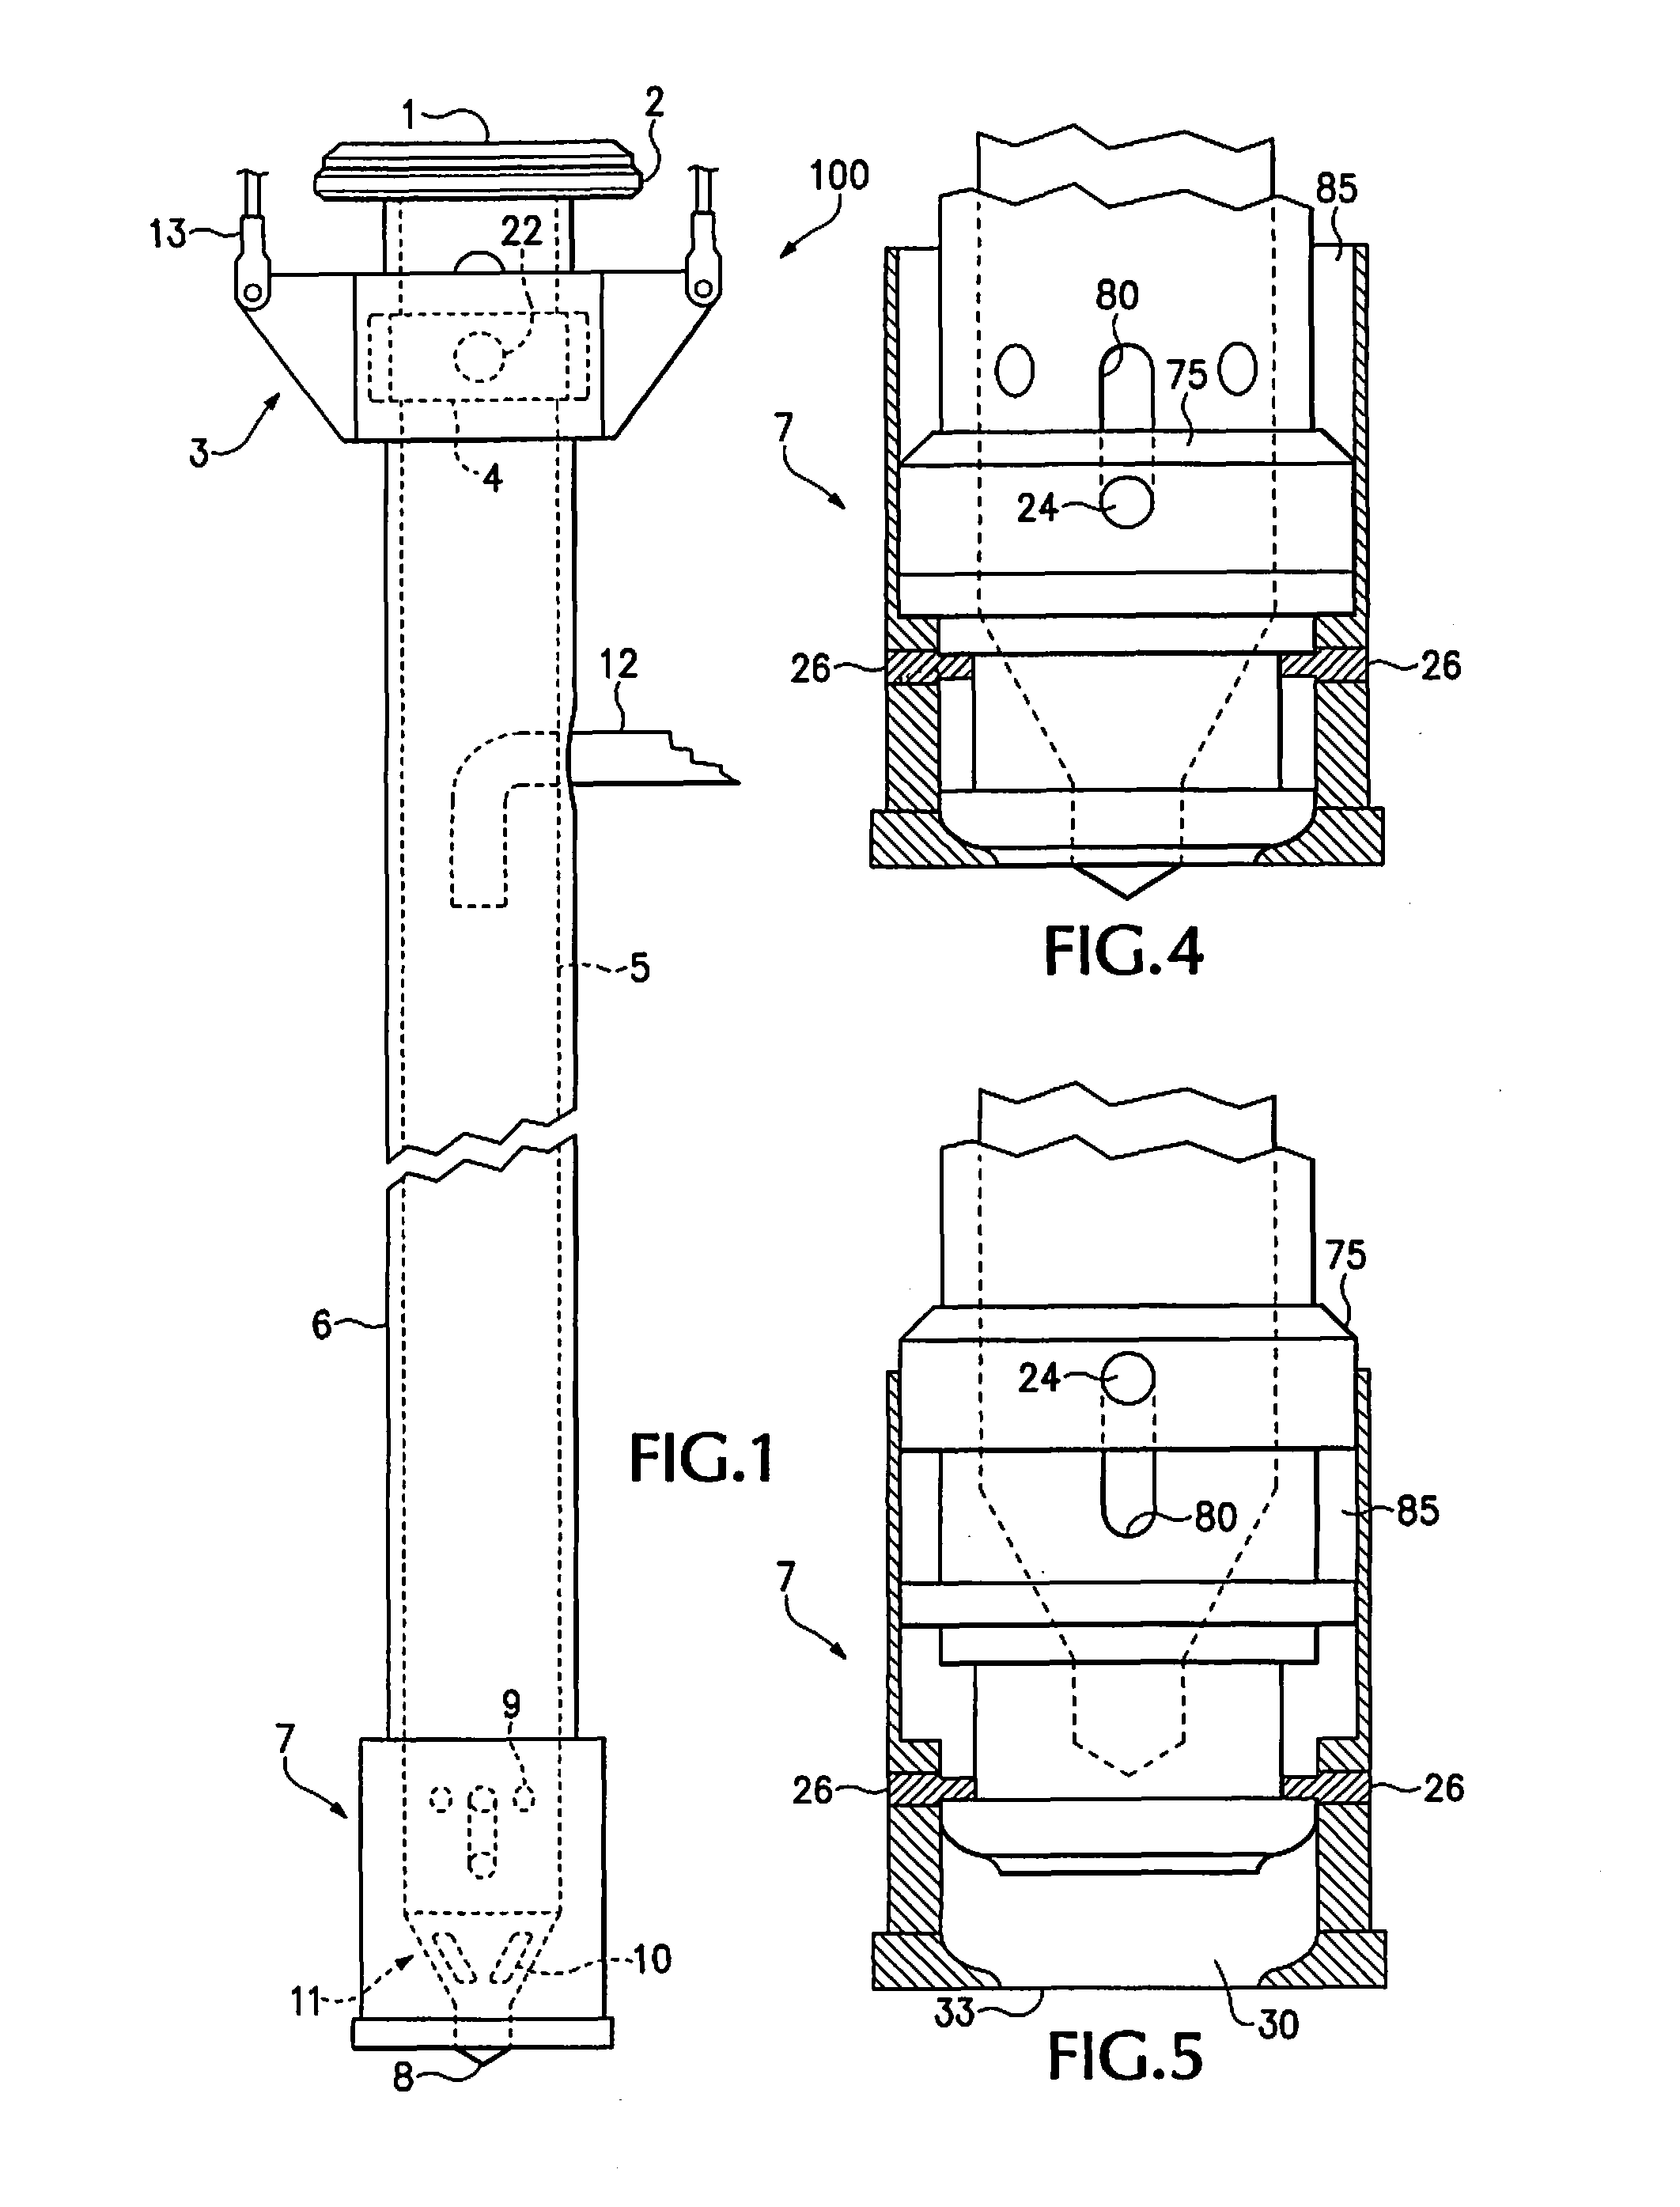 Method and apparatus for forming in ground piles